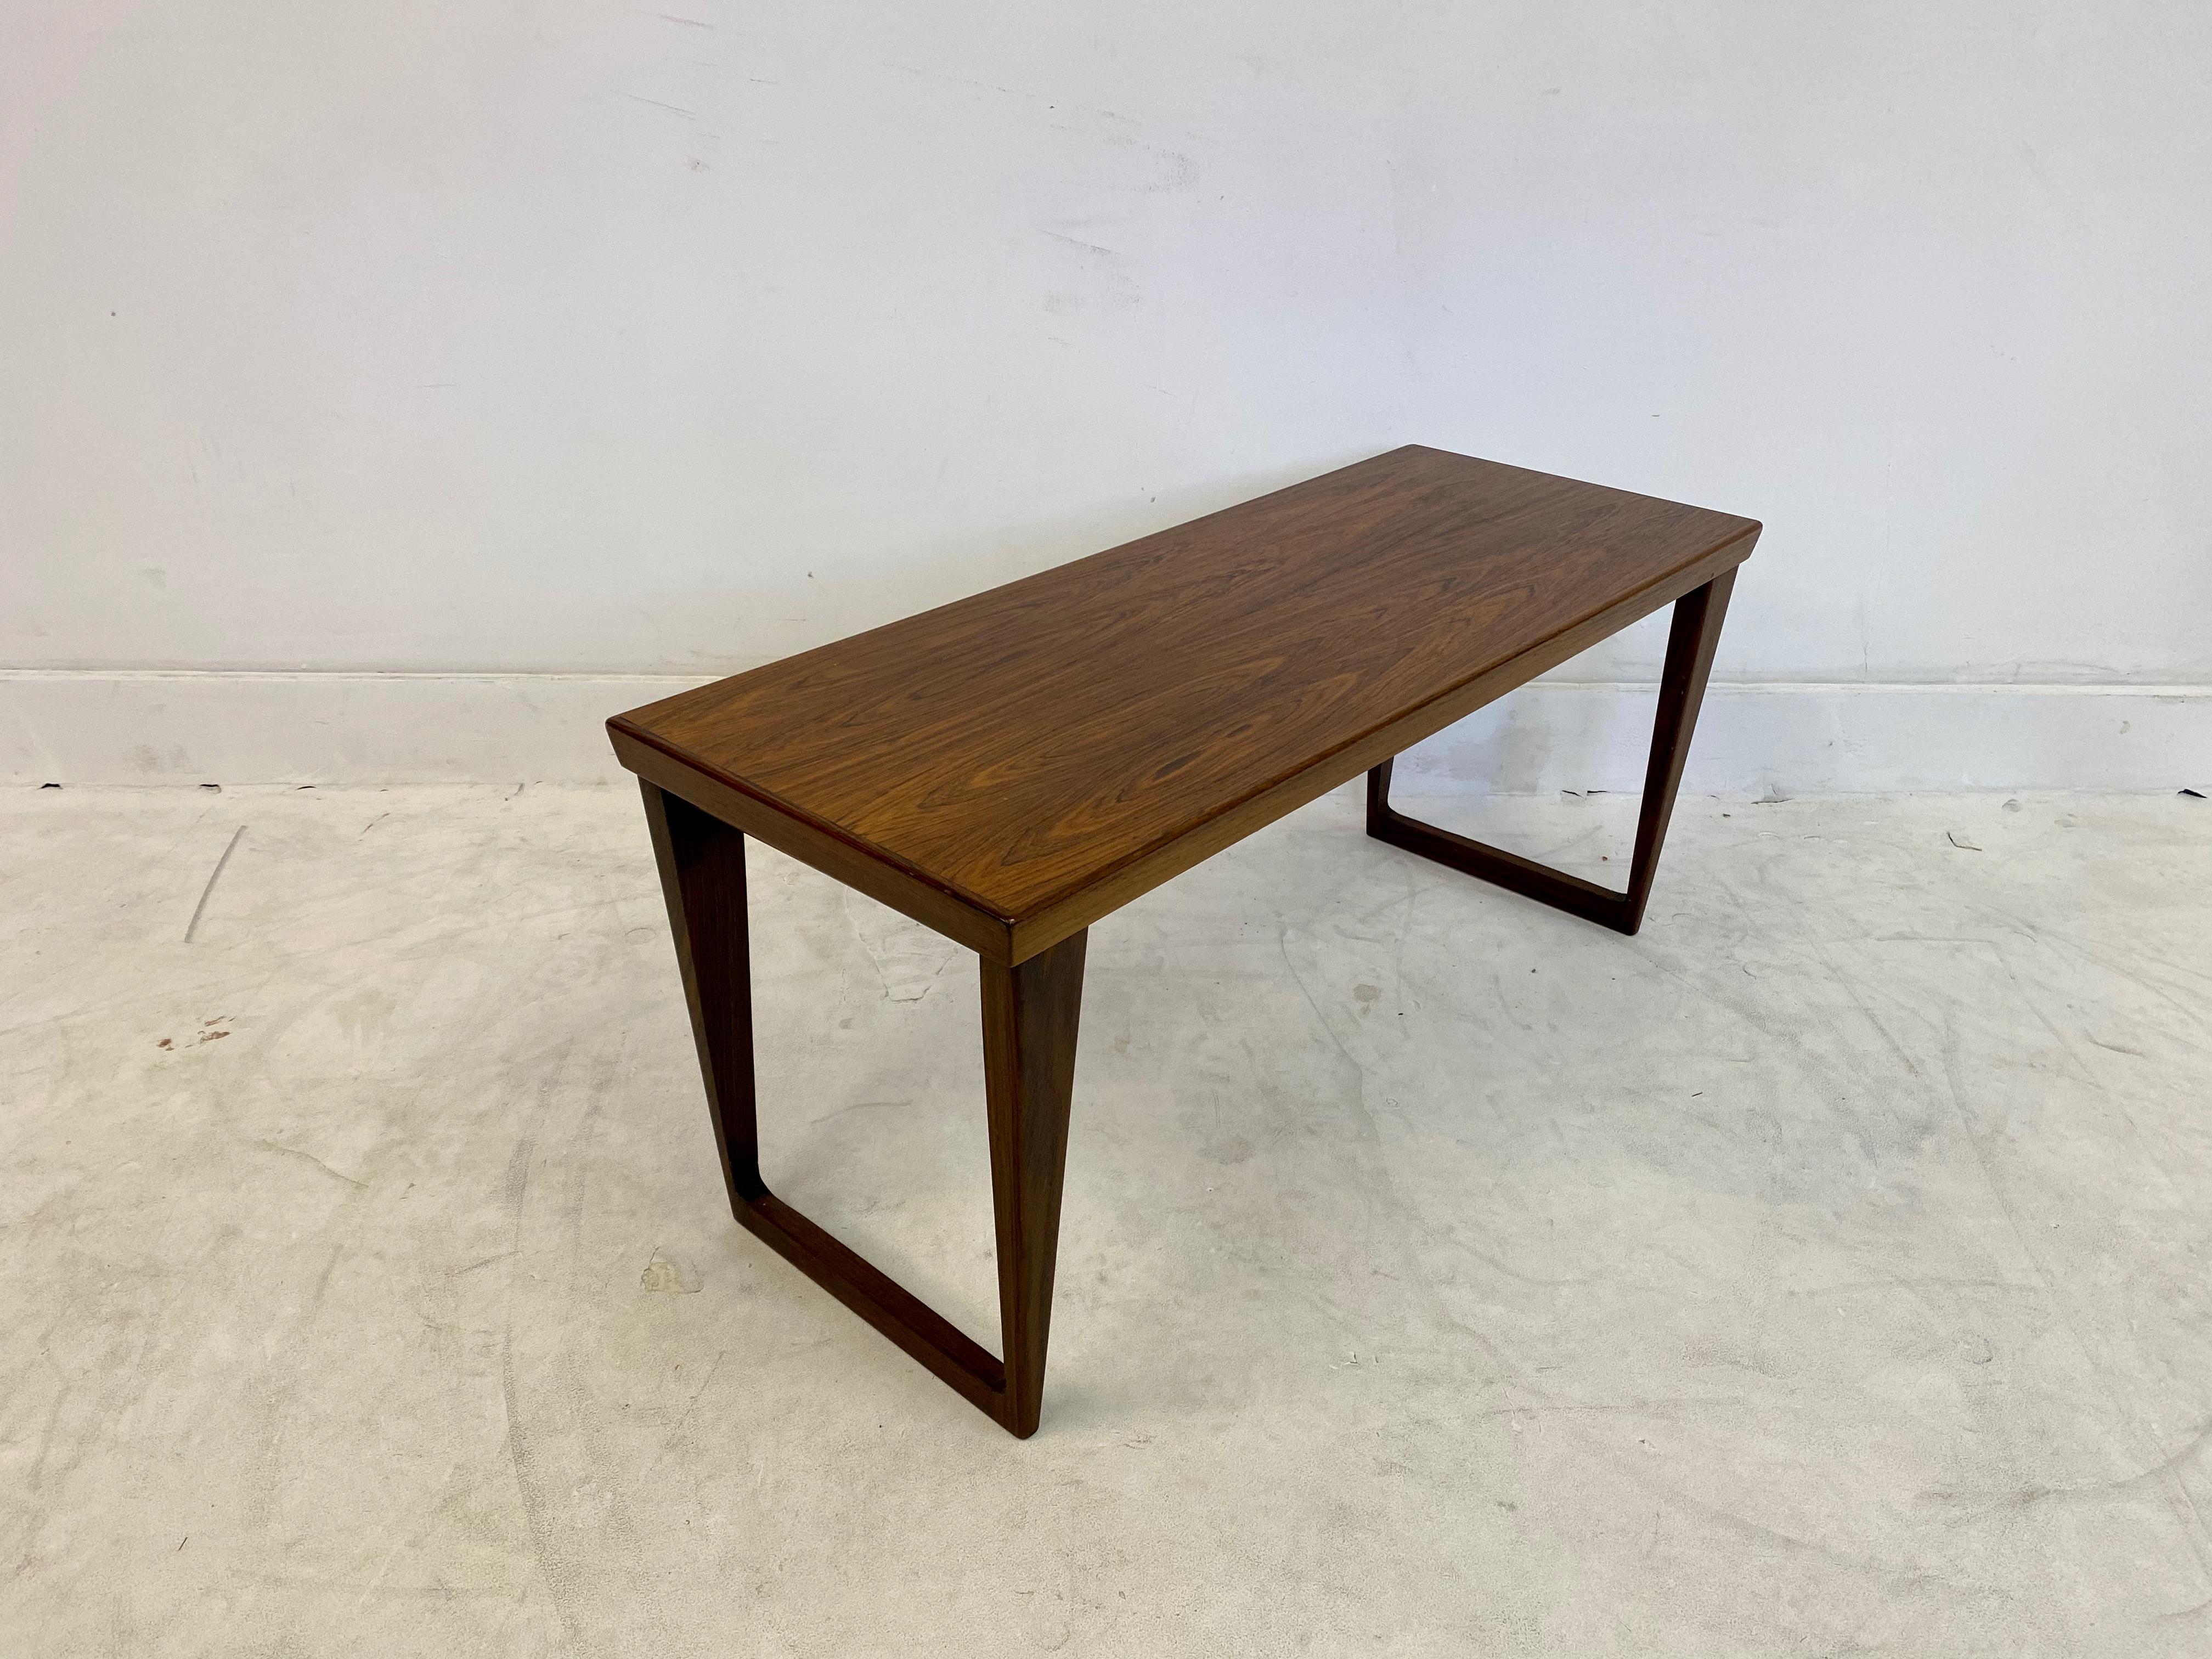 Rosewood hall set

By Kai Kristensen

Manufactured by Aksel Kjersgaard Odder

Mirror, bench and two drawer chest

Model numbers 35, 32 and 14

Mirror with visible joints and dowels at the edges

Measures: Drawers 19 H x 40.5 W x 31 D